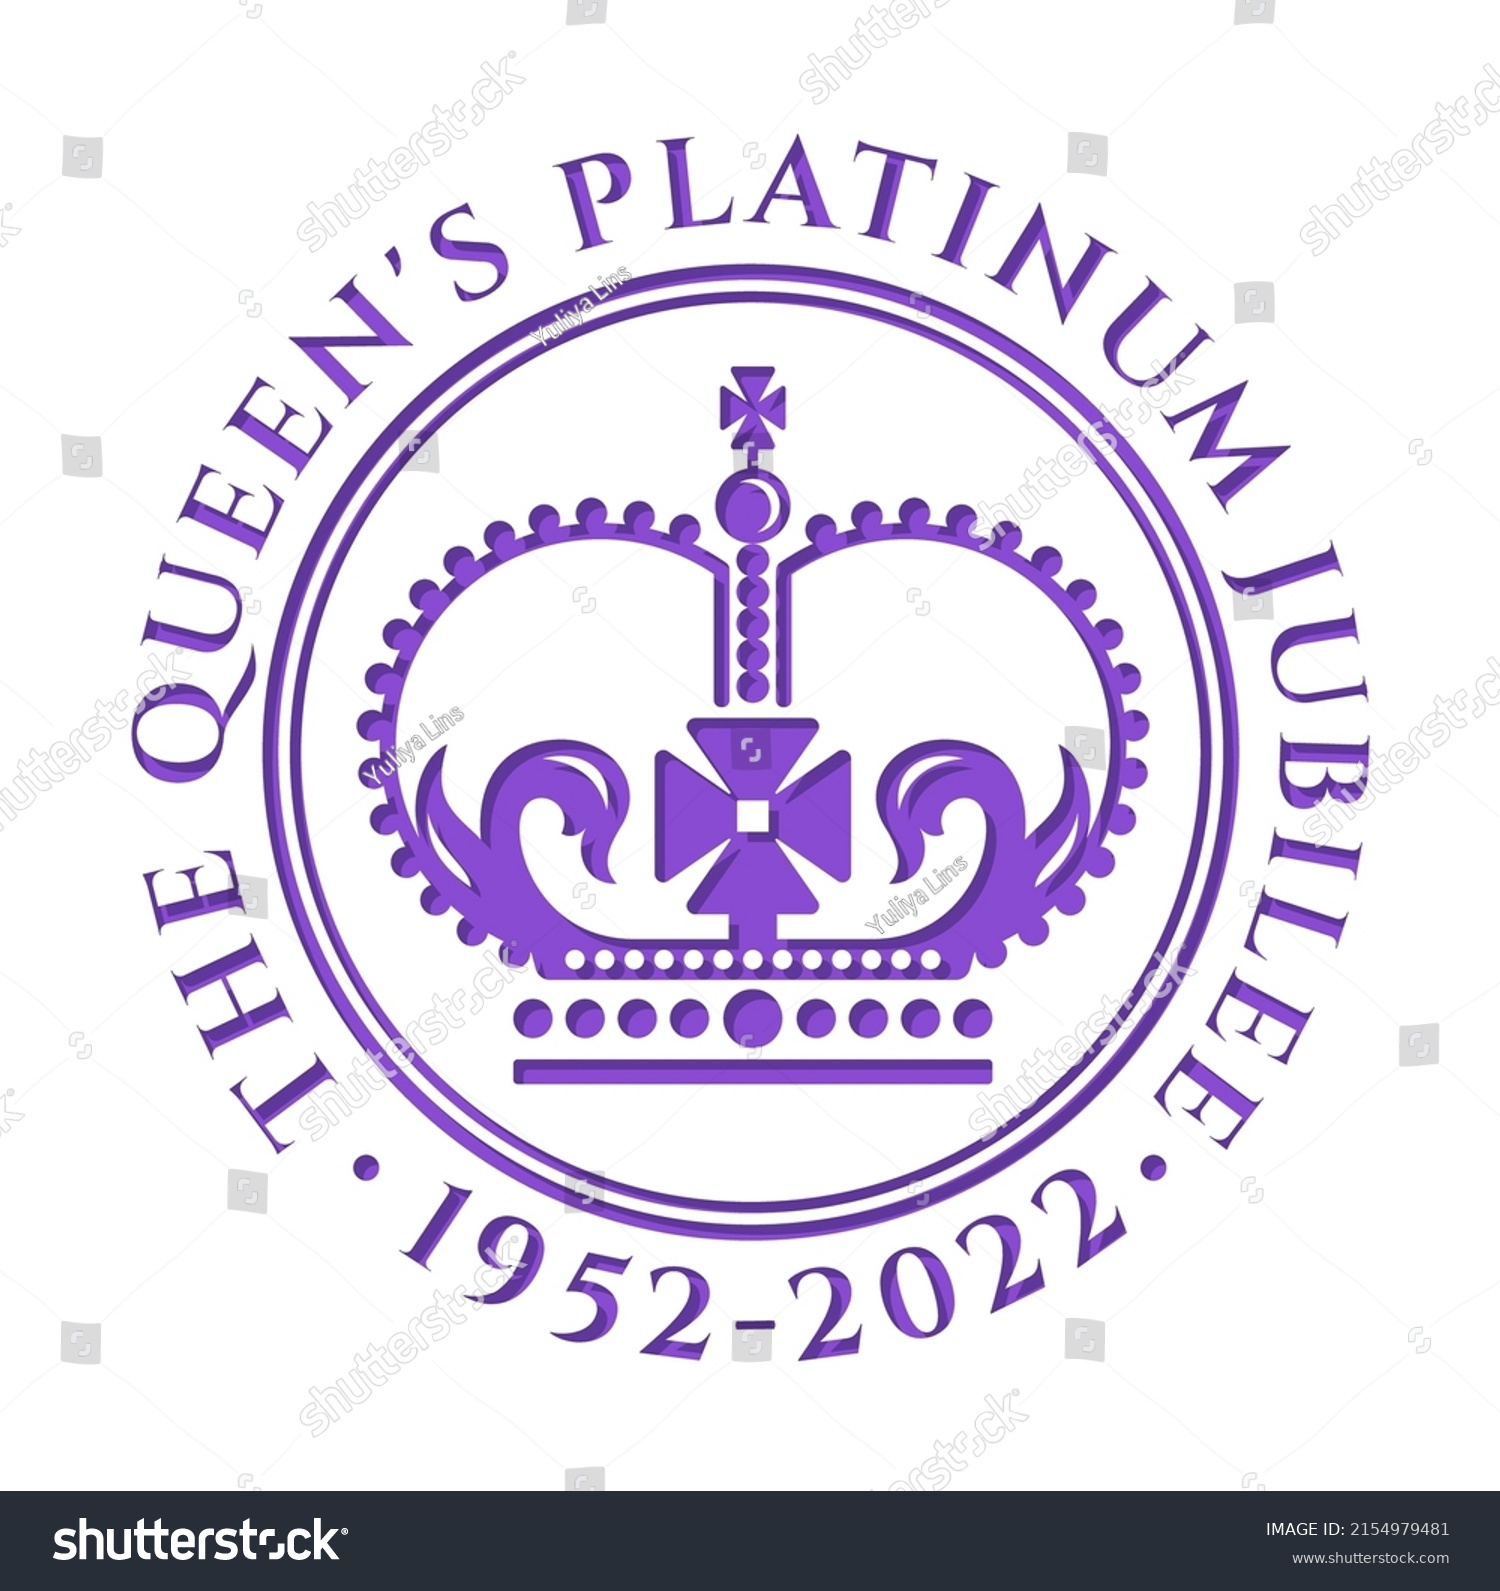 SVG of The Queen's Platinum Jubilee. 2022. Celebration Queen Elizabeth. Vector illustration about 70 years of service. Design for banner, greeting card, brochure and more. svg